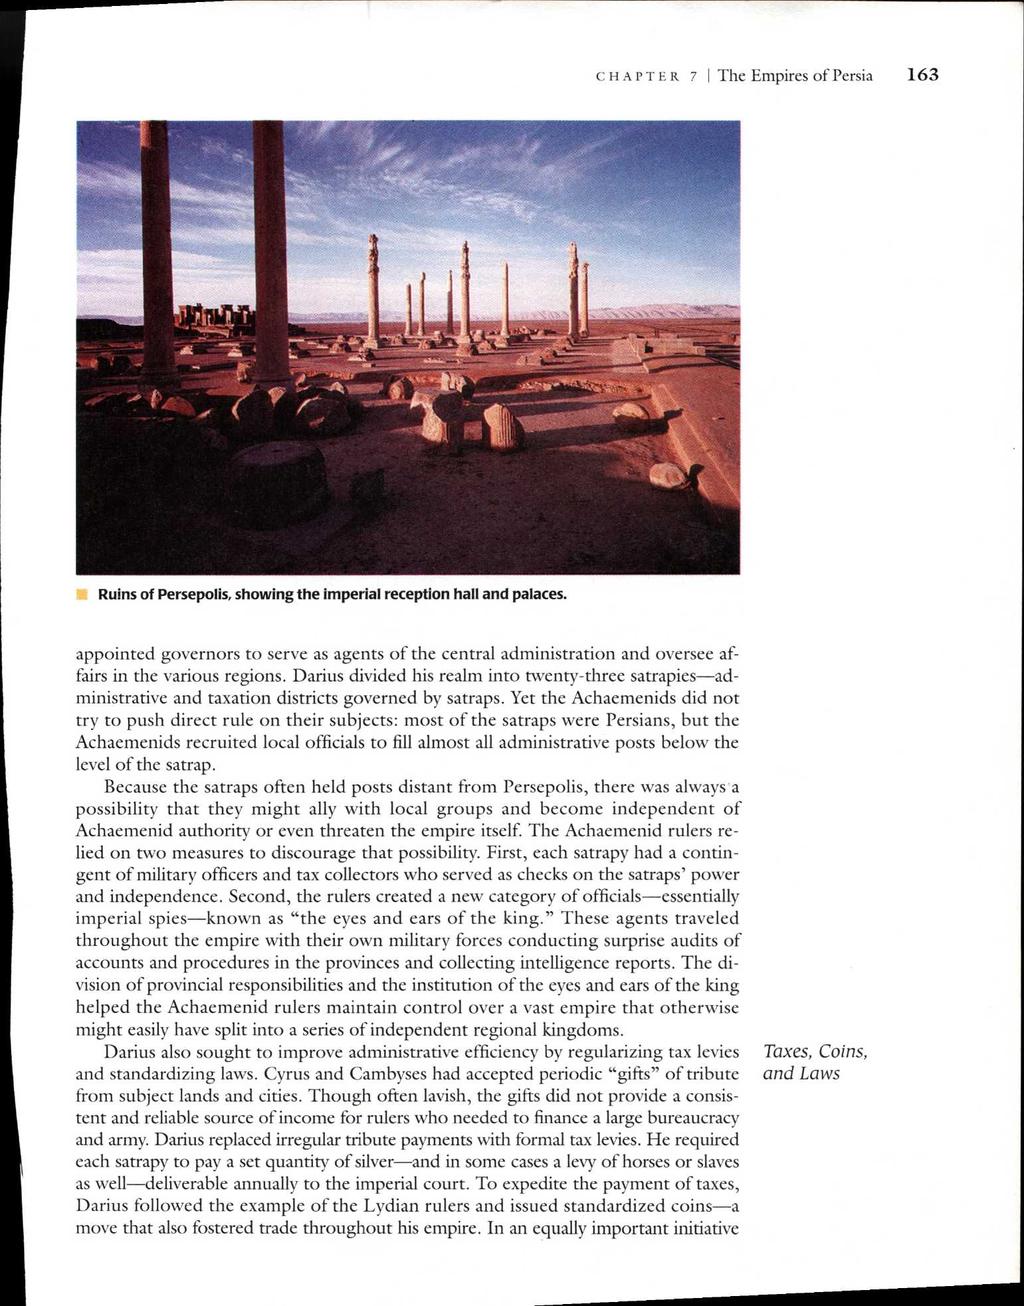 CHAPTER 7 The Empires of Persia 163 Ruins of Persepolis, showing the imperial reception hall and palaces.